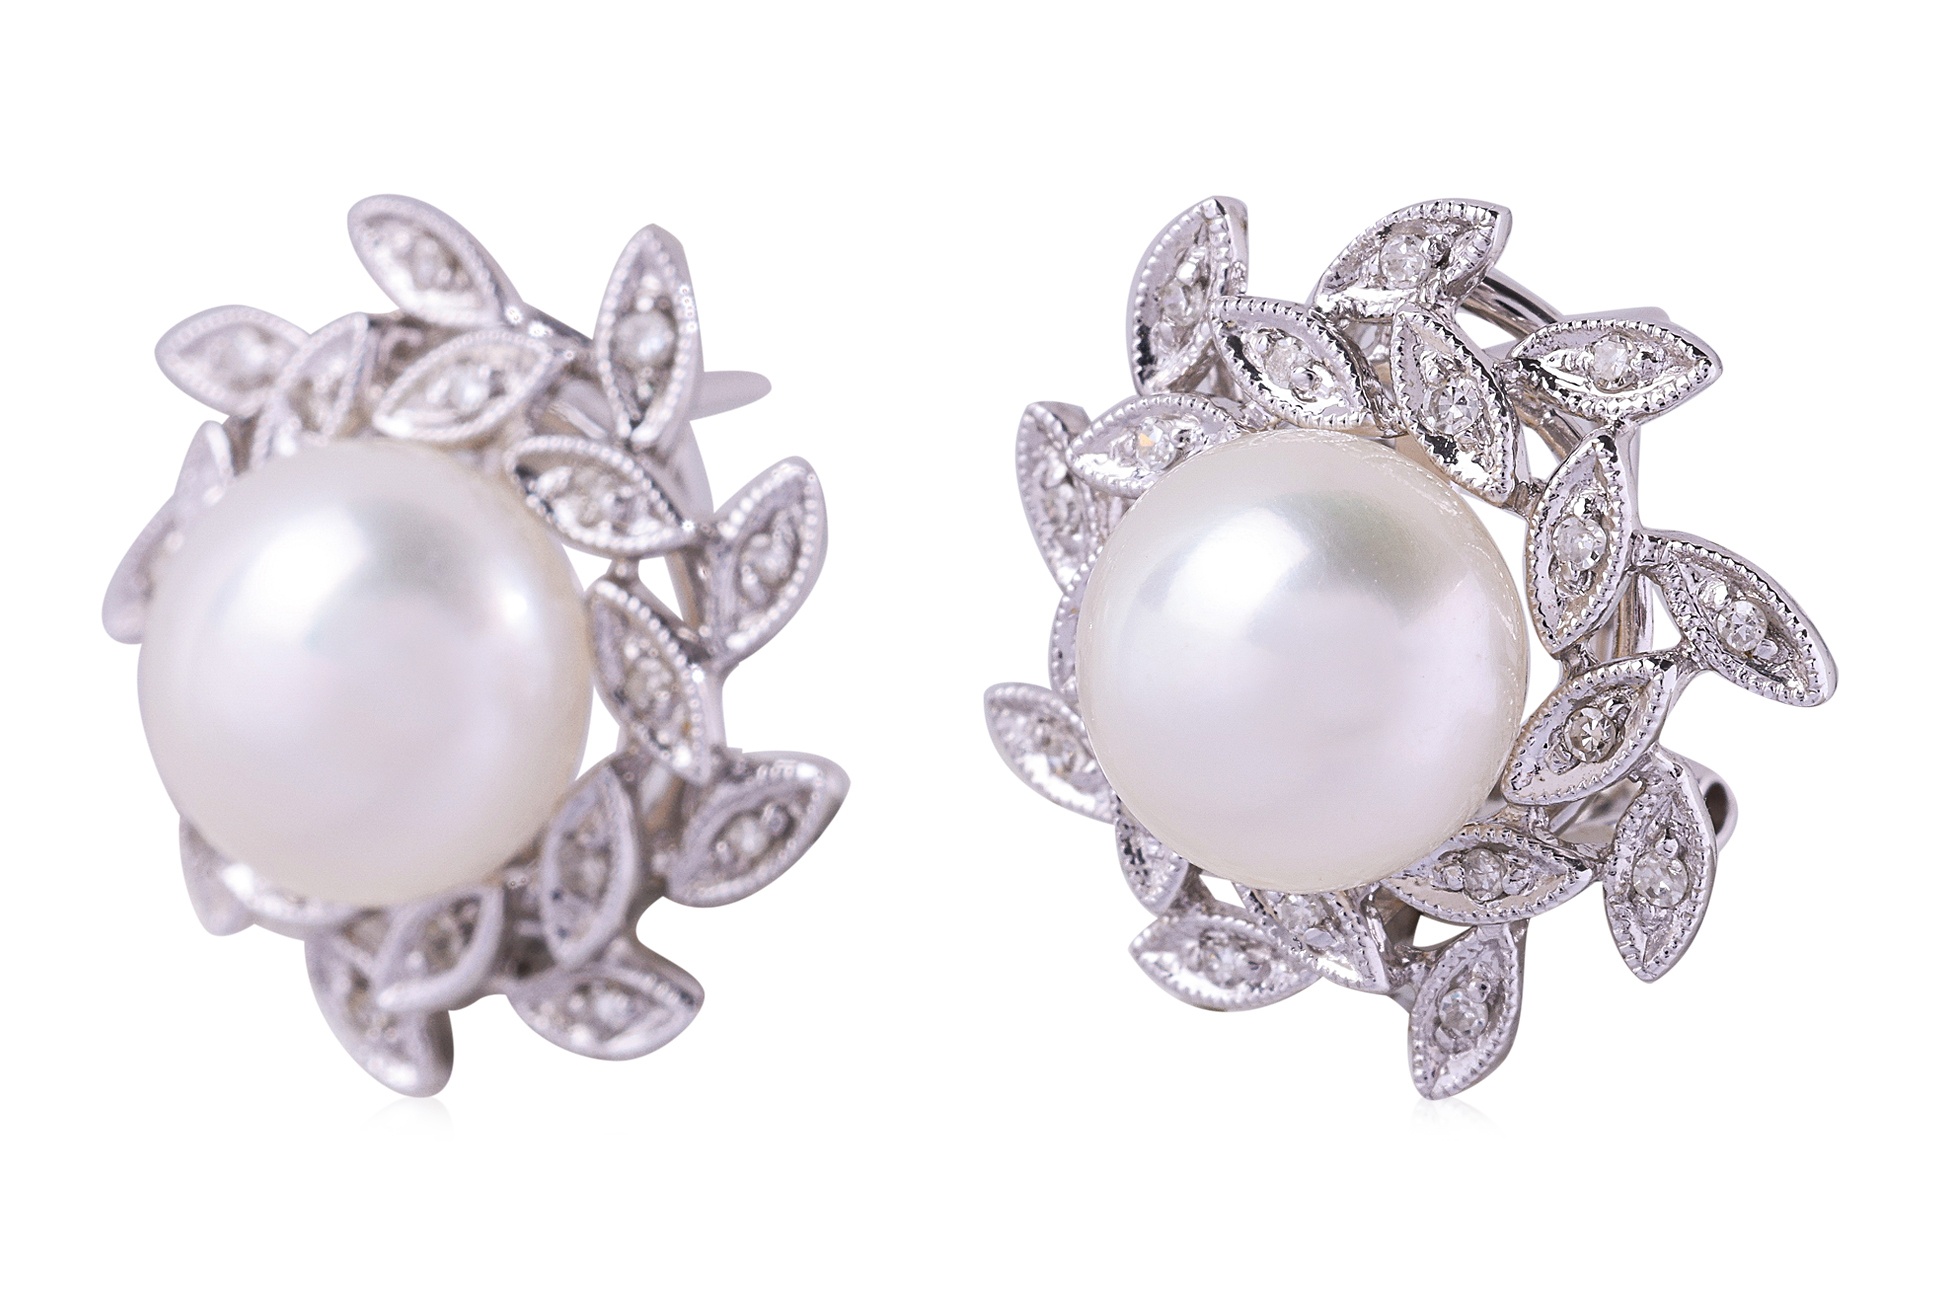 A PAIR OF CULTURED PEARL AND DIAMOND EARRINGS - Image 2 of 3